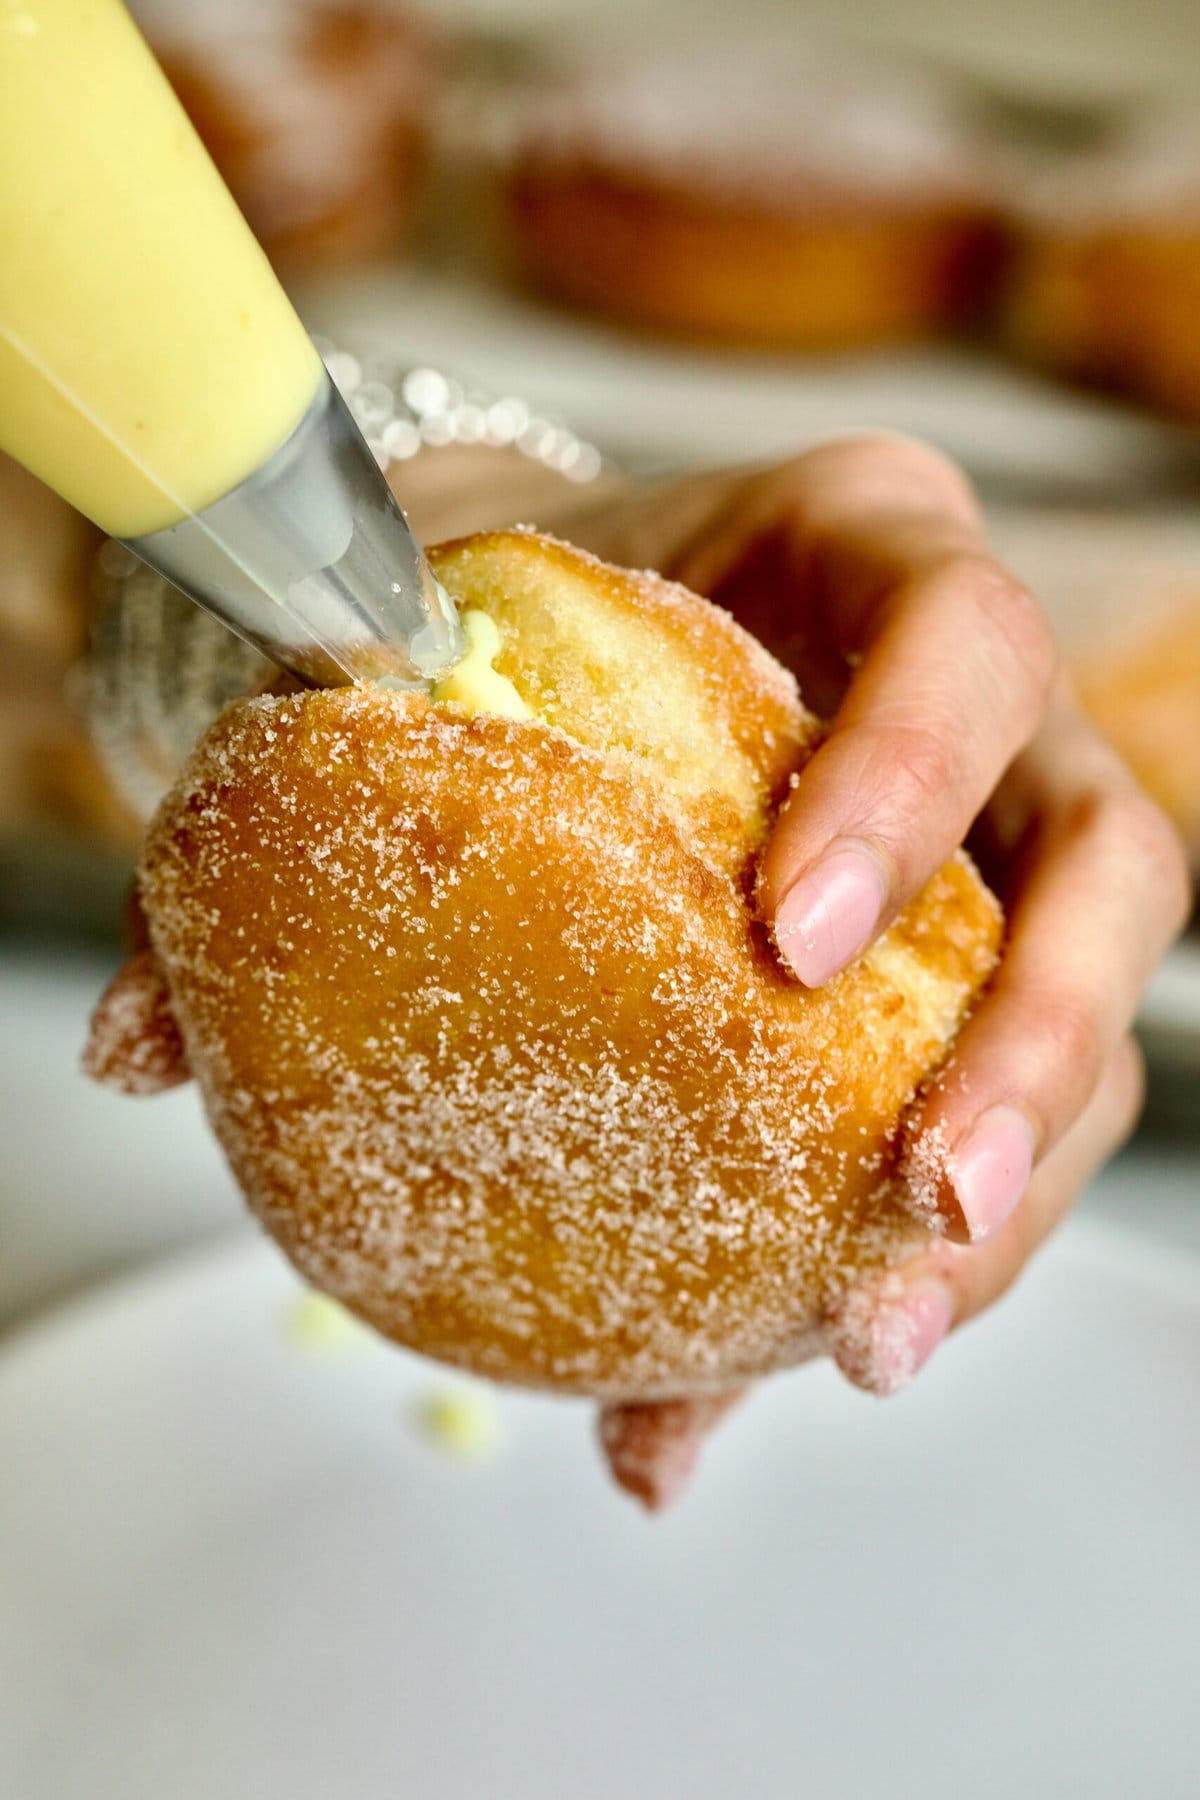 Process of making Bomboloni (how to make bomboloni recipe)- filling the donut with Italian pastry cream with a pastry bag. Hands holding the donut.